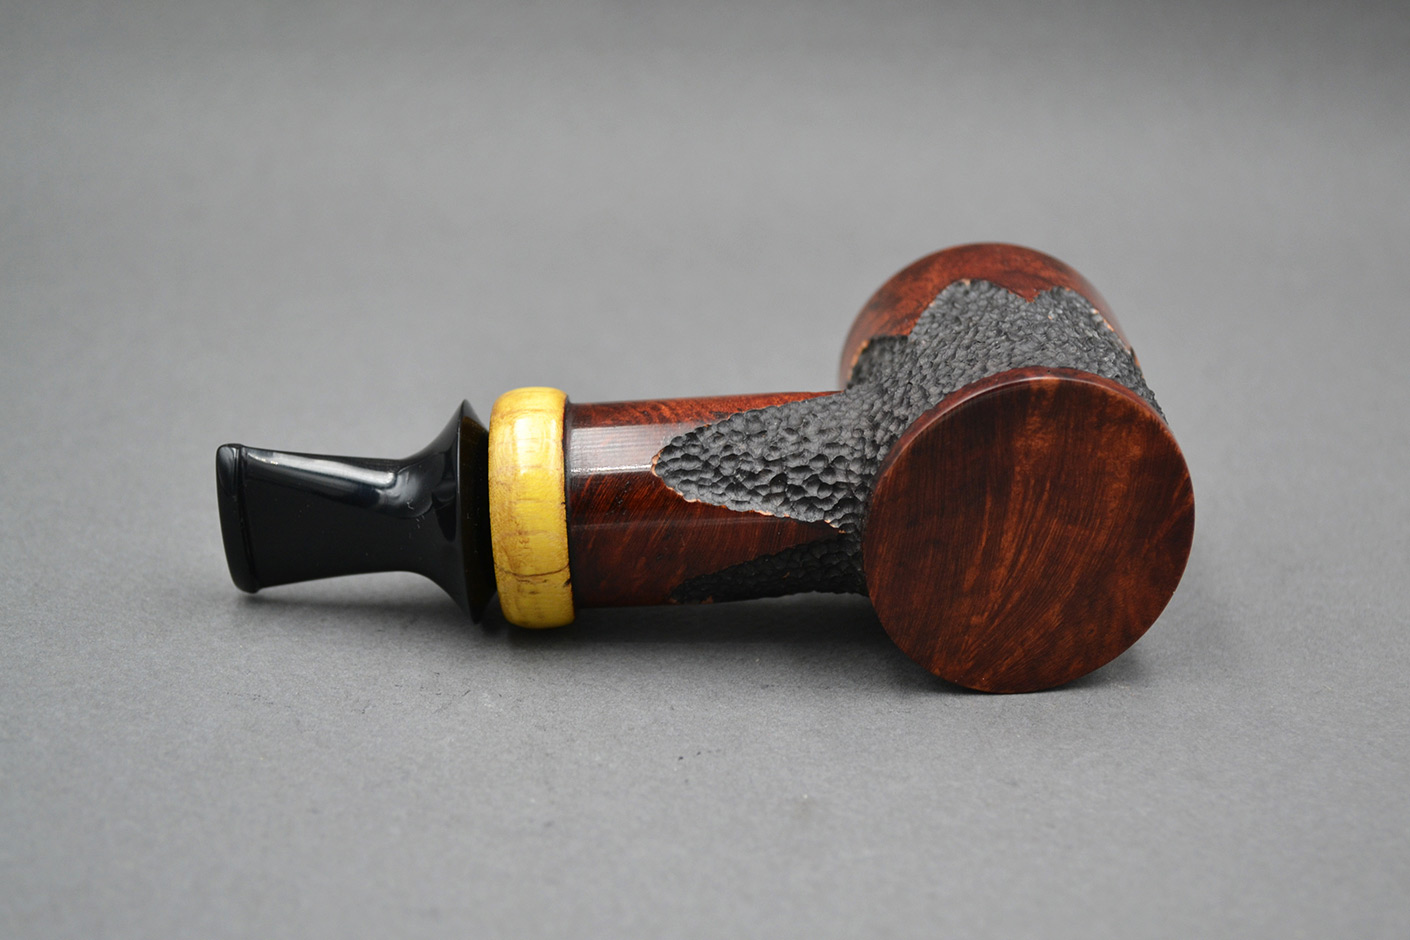 King Reverse Calabash 21133 Handmade Briar Tobacco Pipe by Constantinos Zissis 07